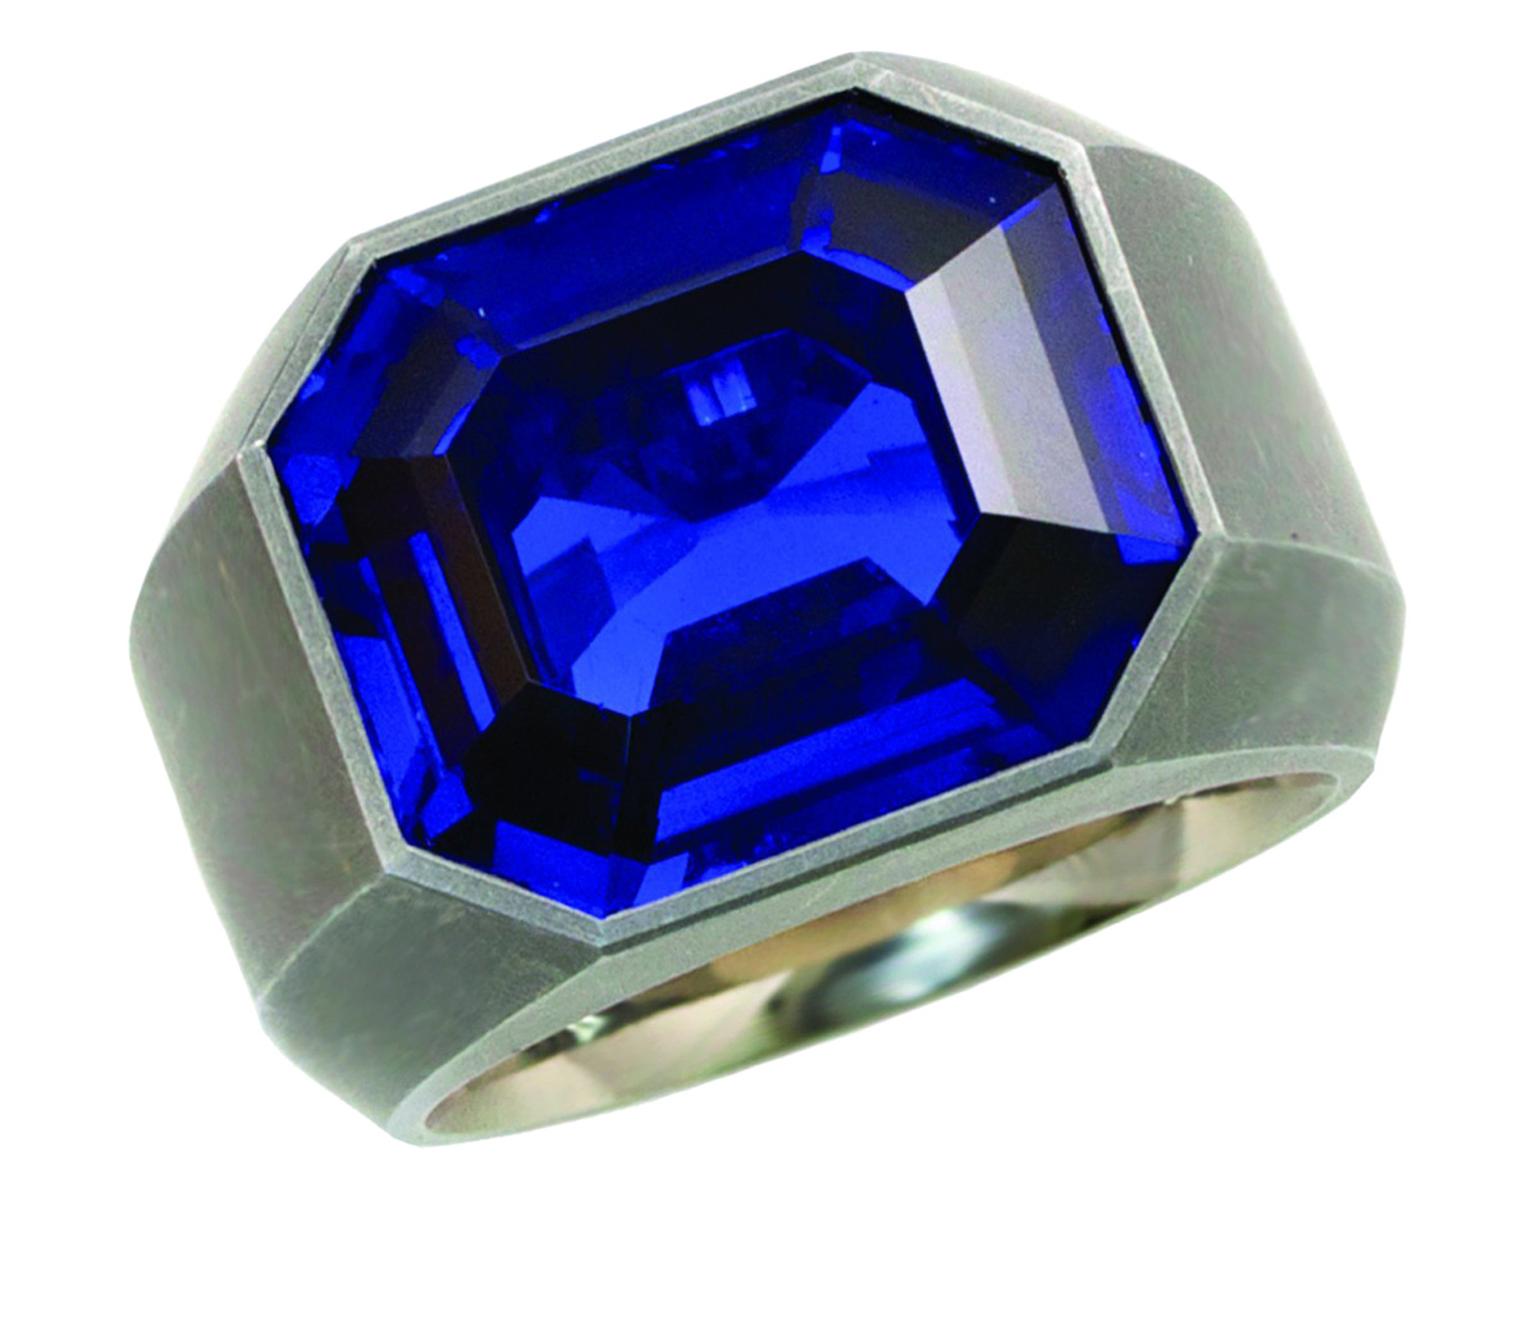 Hemmerle exceptional Royal Blue Burma Sapphire (No Heat) Ring_20140203_Zoom